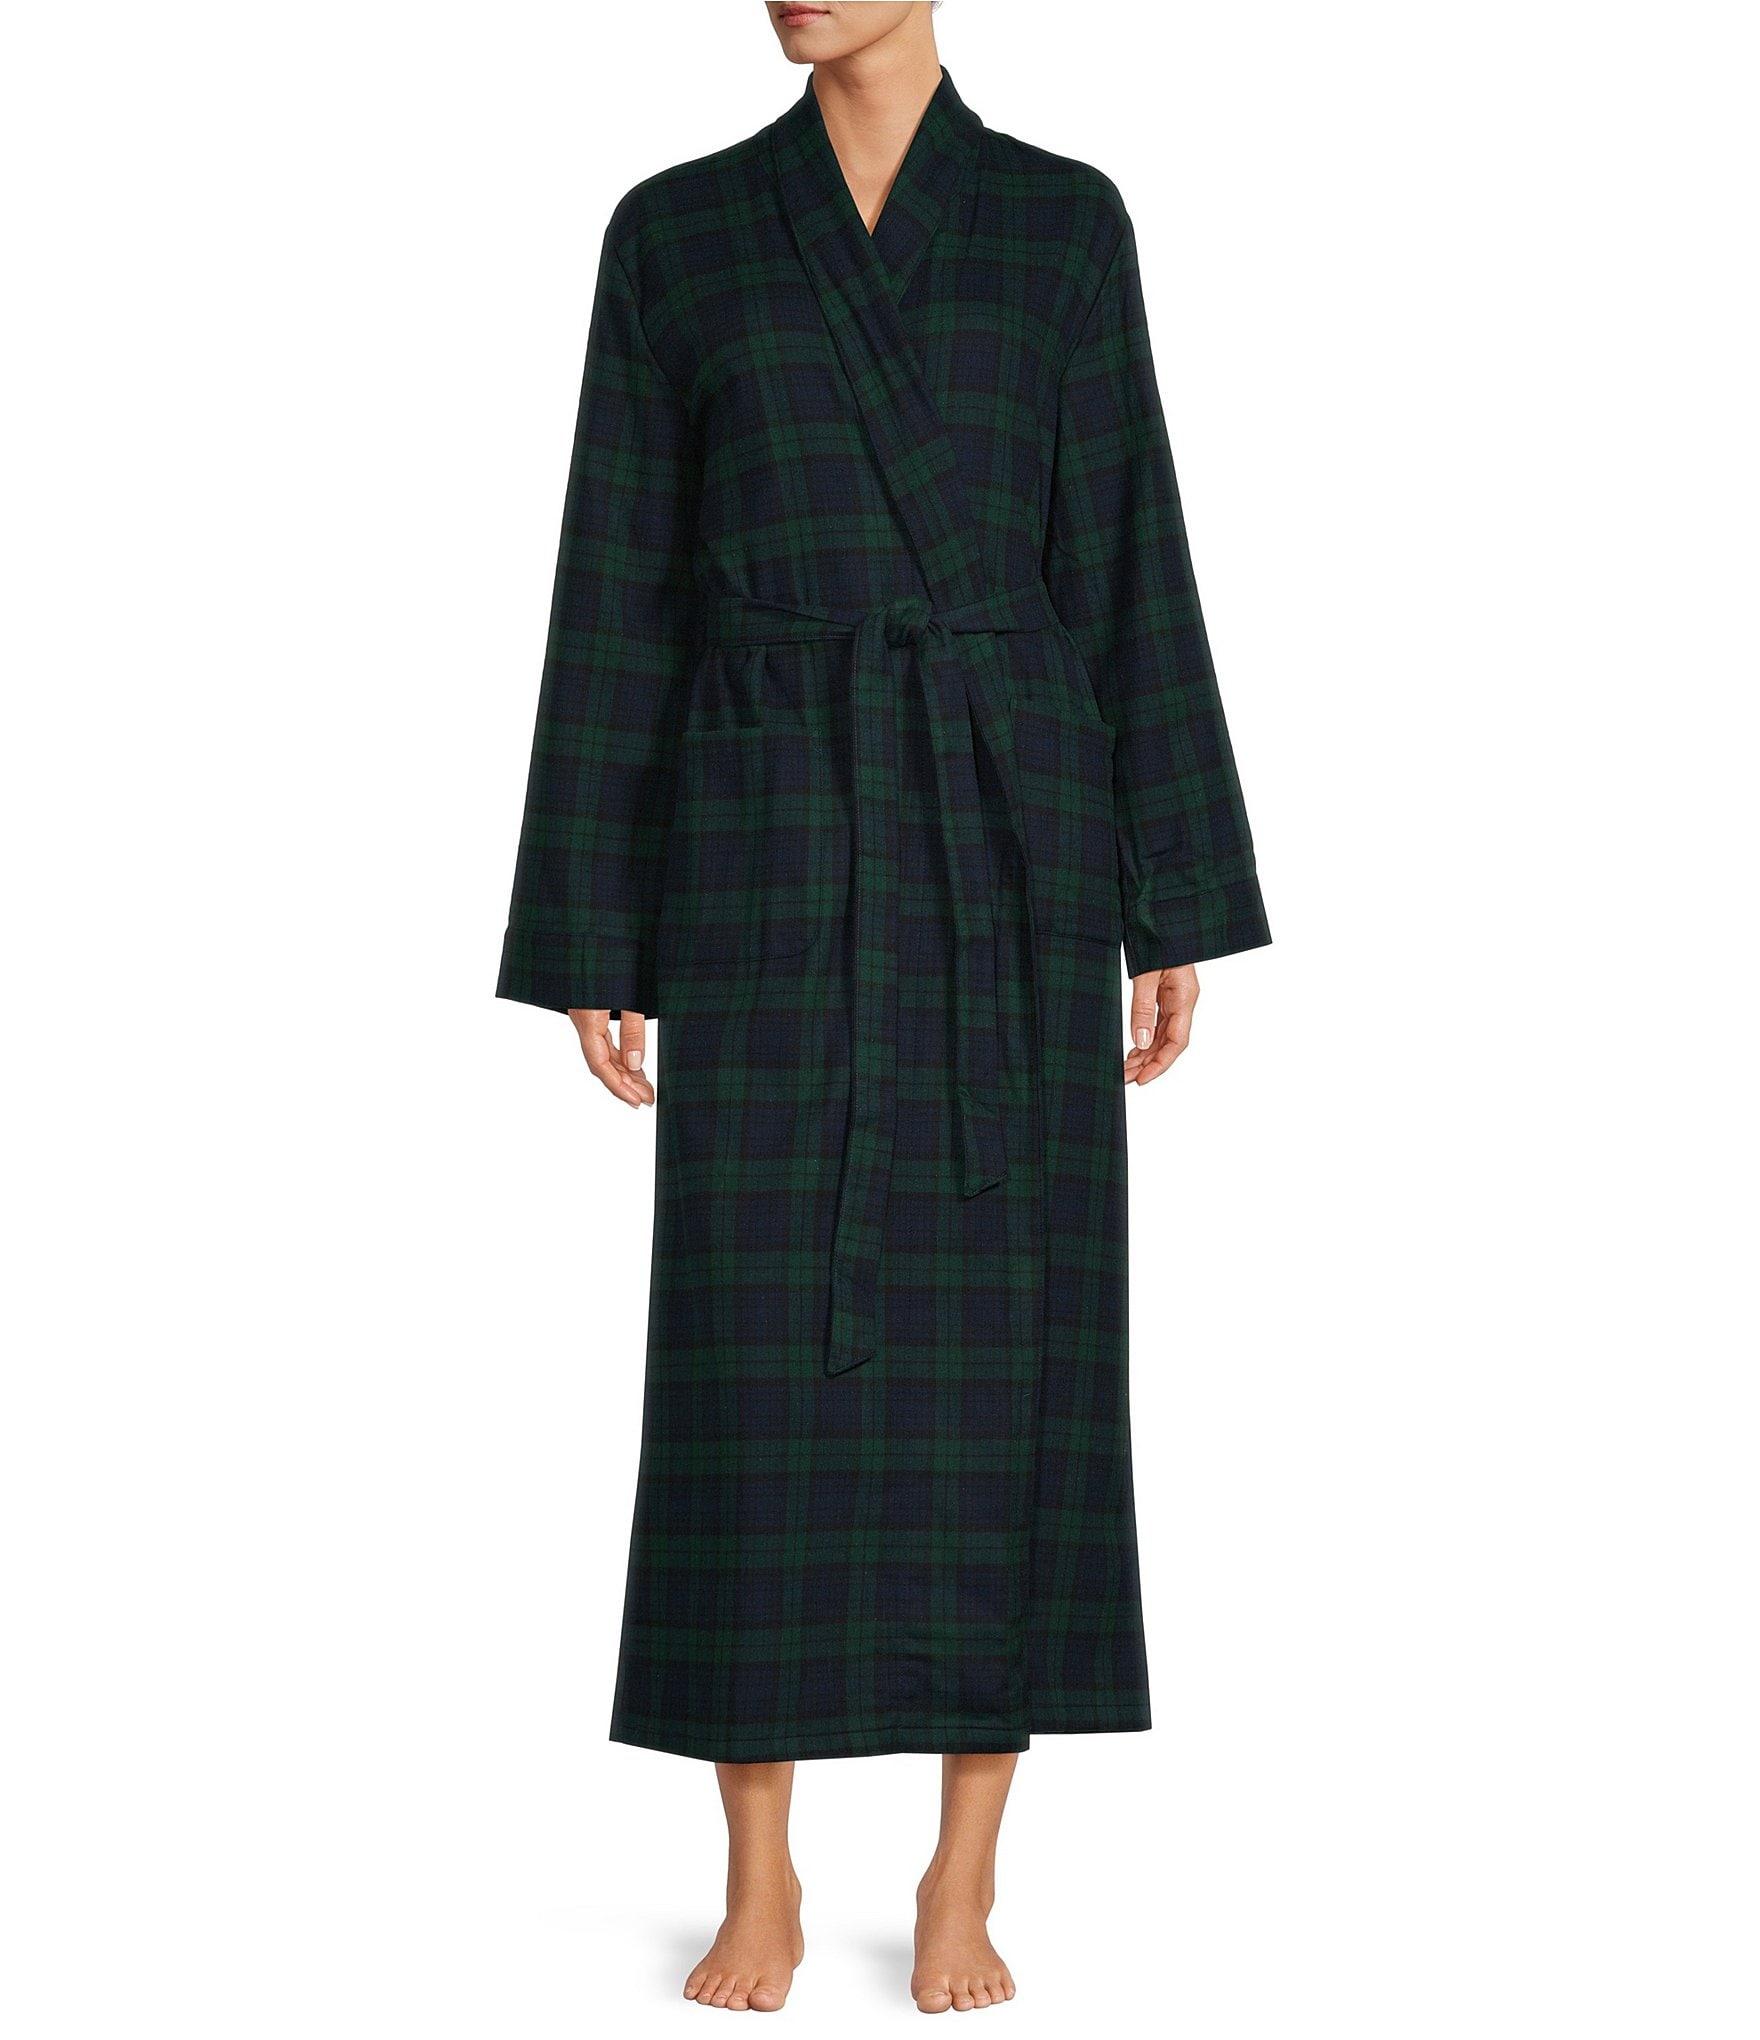 Women's Pajamas, Sleepwear and Robes by L.L.Bean